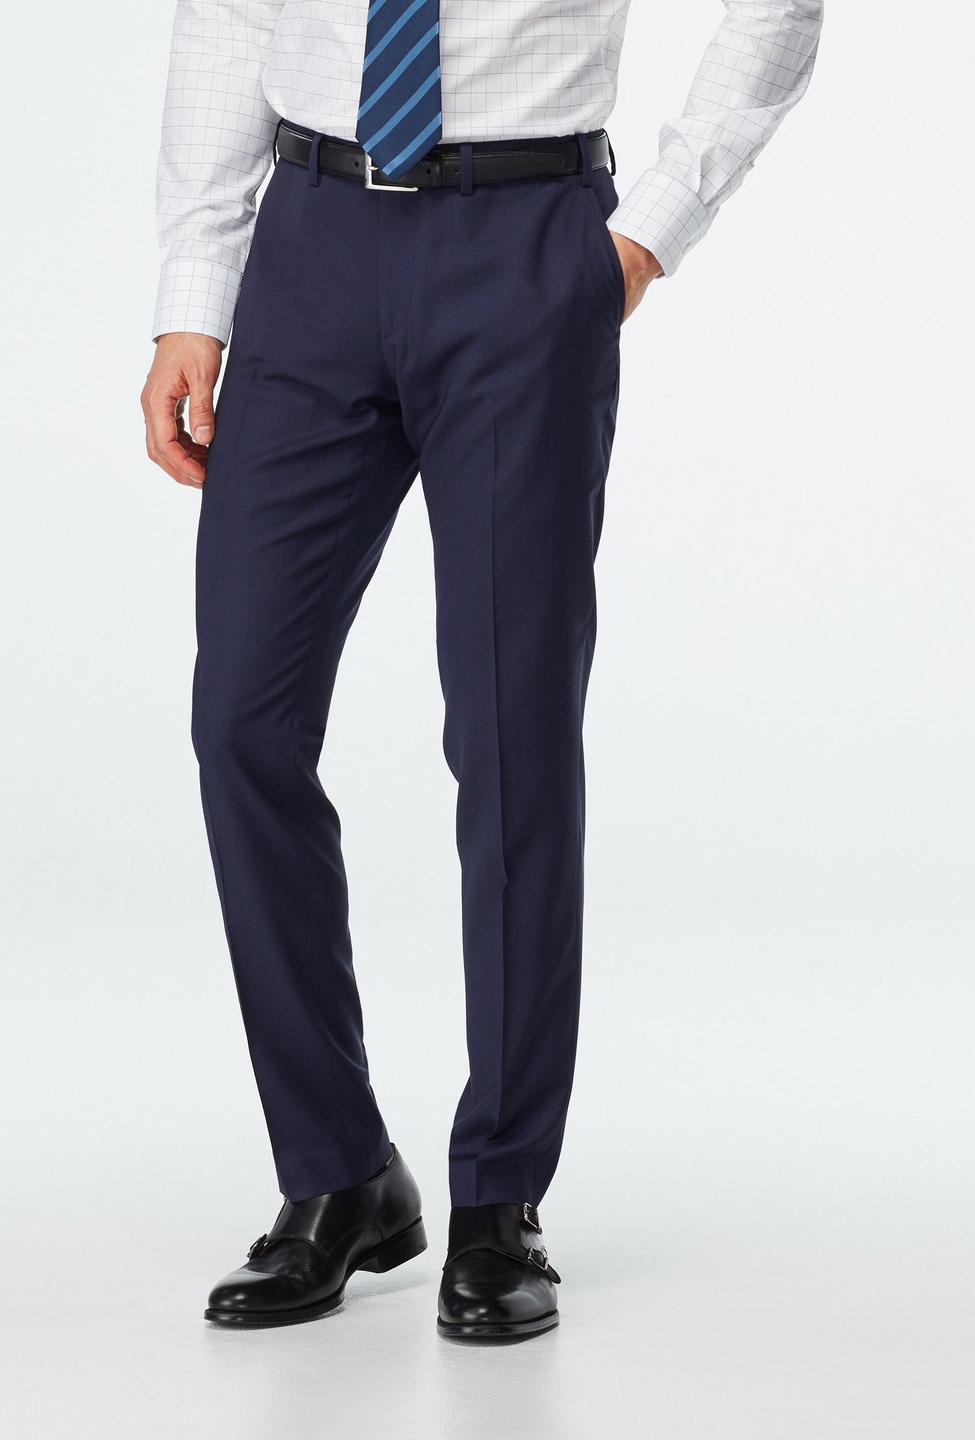 Navy pants - Milano Solid Design from Indochino Collection